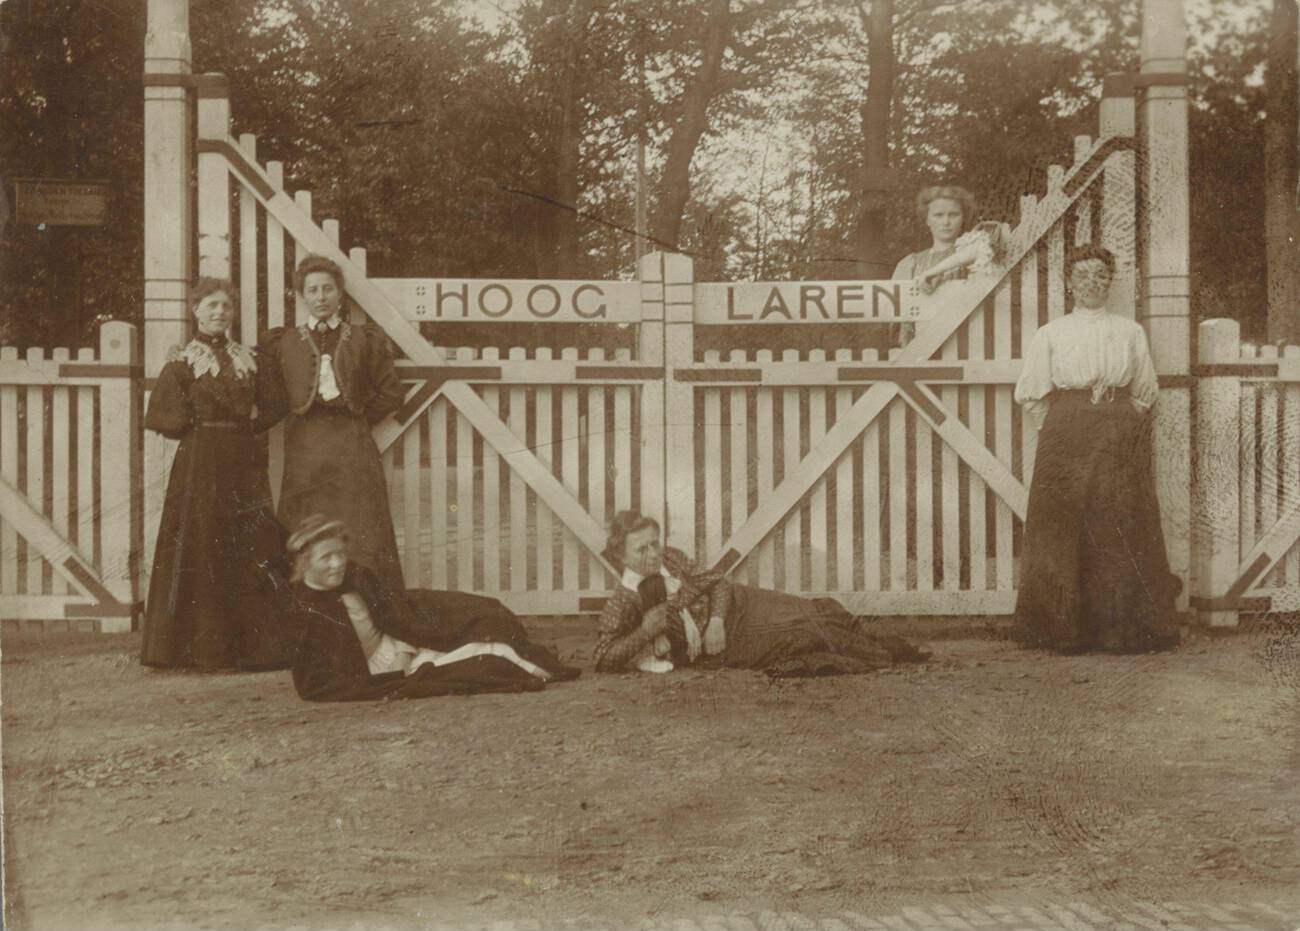 Group portrait of six young ladies in front of the Hooglaren fence, anonymous, Netherlands, 1900